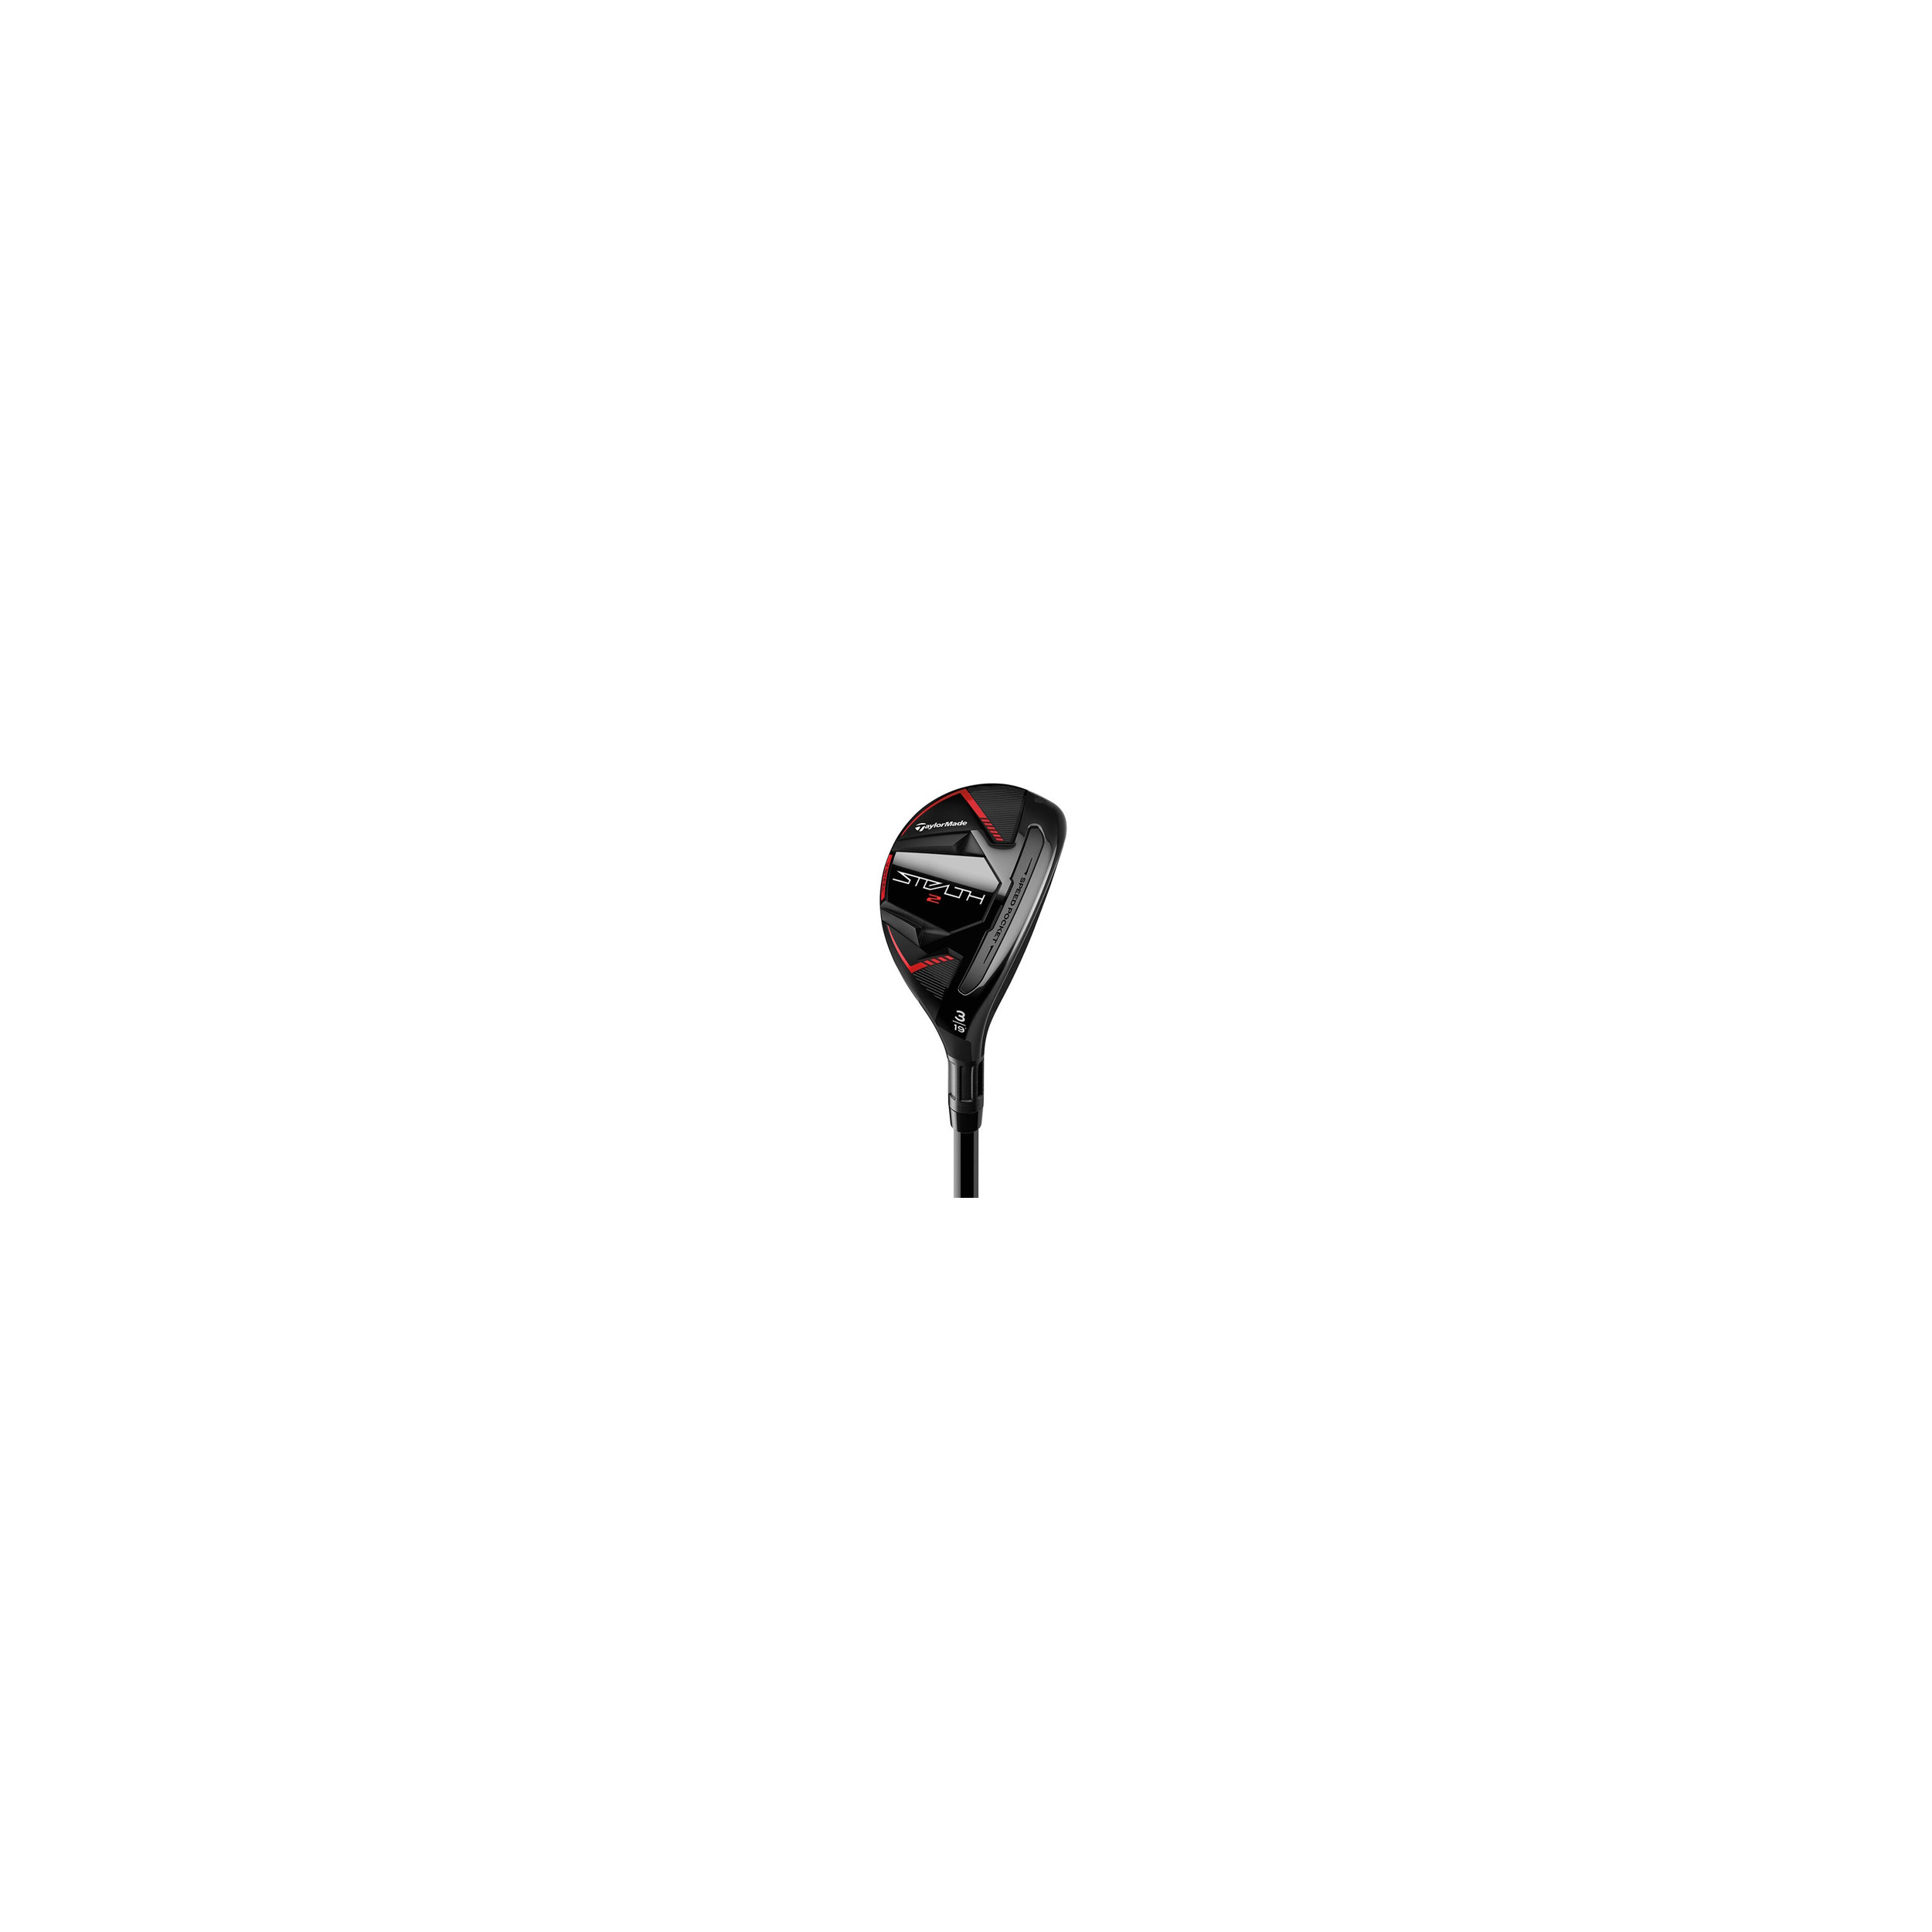 HIBRIDO TAYLORMADE STEALTH 2 6H